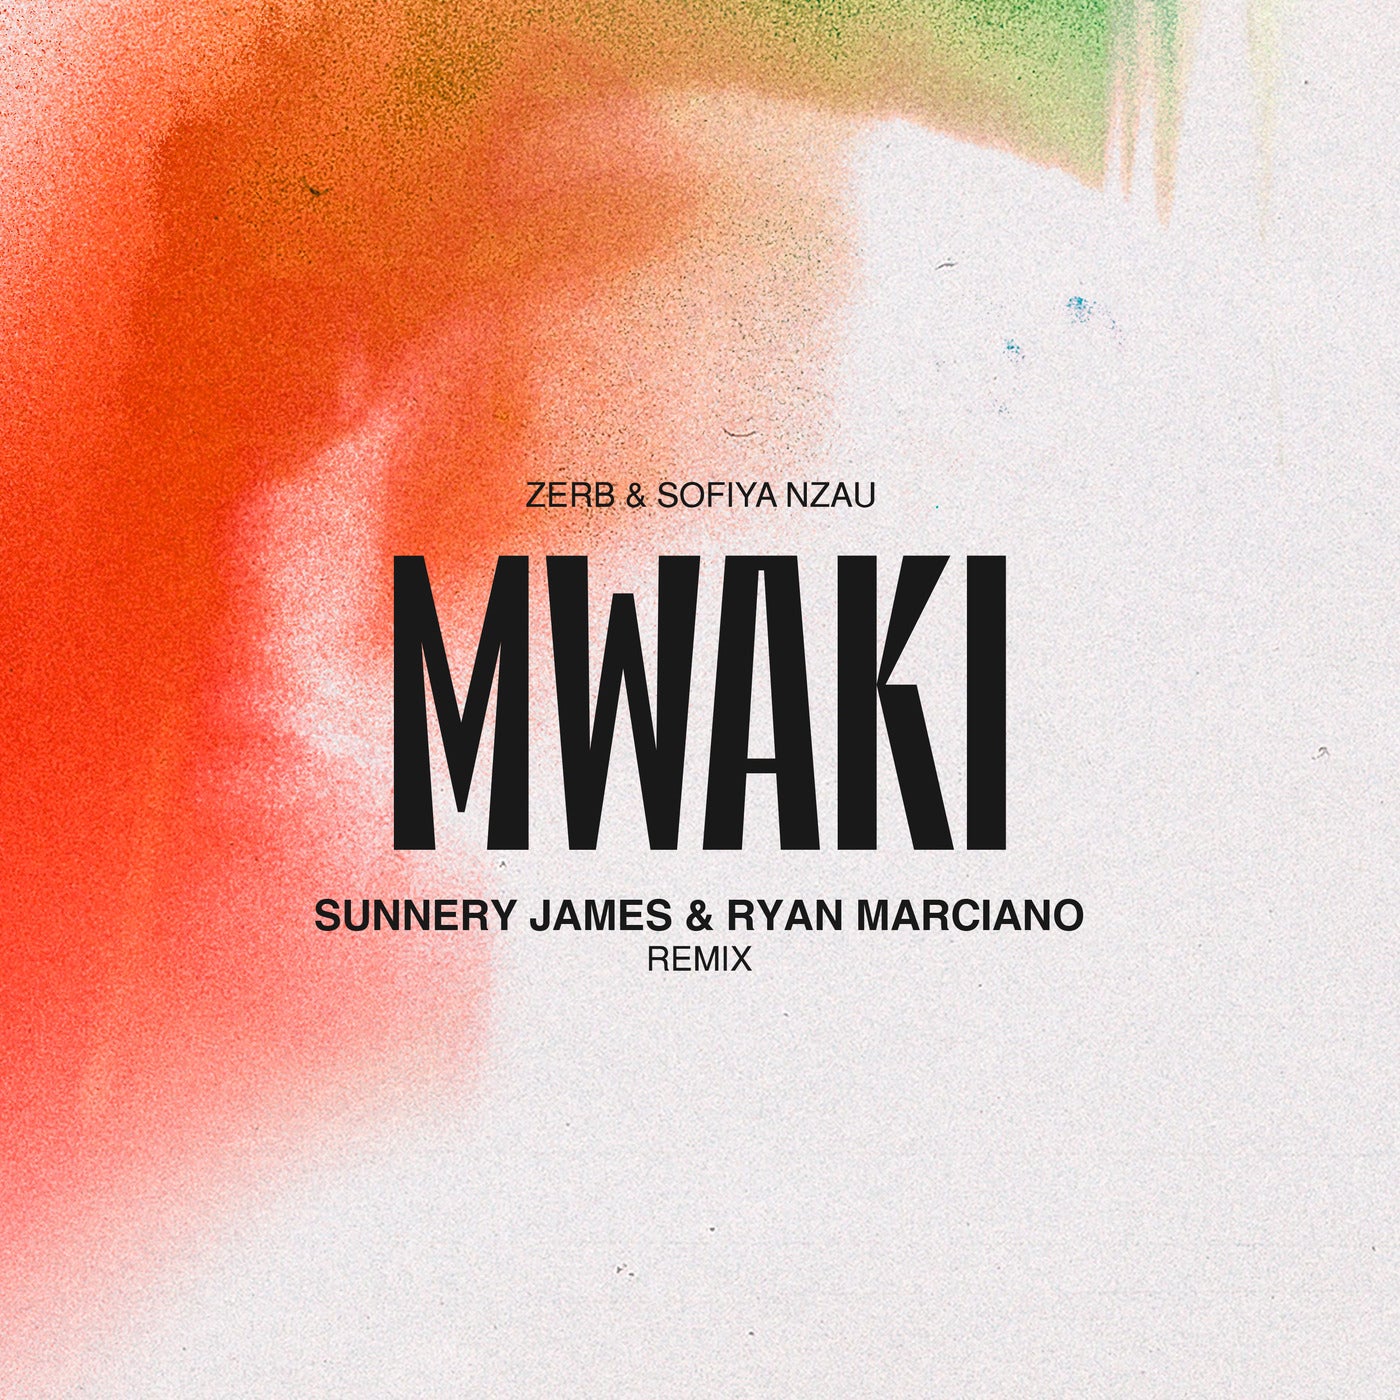 image cover: Sunnery James & Ryan Marciano, Zerb, Sofiya Nzau - Mwaki - Sunnery James & Ryan Marciano Remix Extended on TH3RD BRAIN